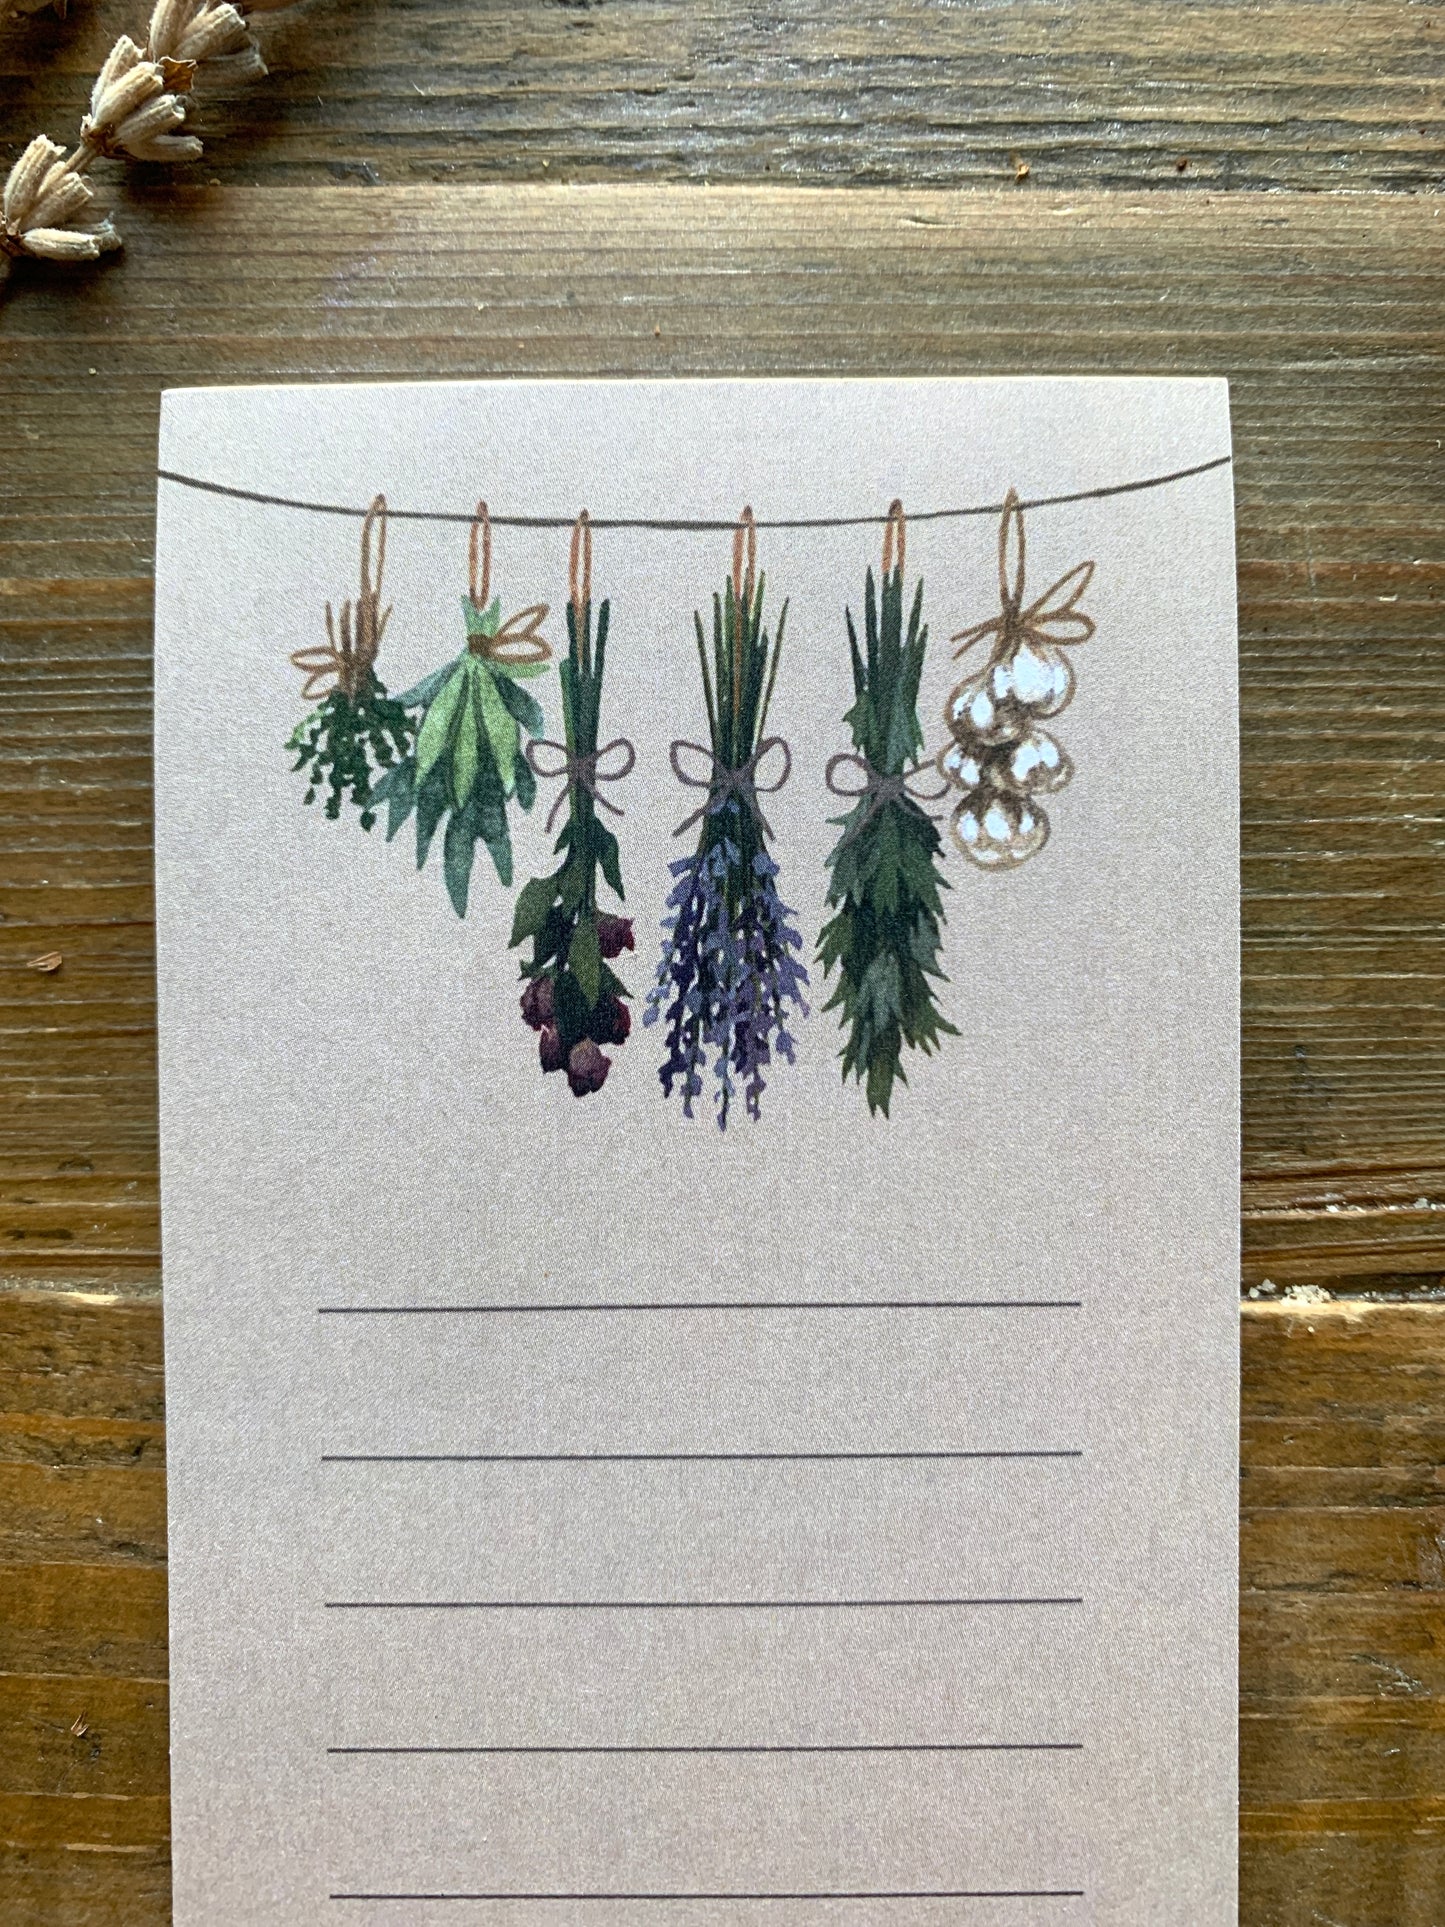 Witch's herbs notepad - now slightly larger!